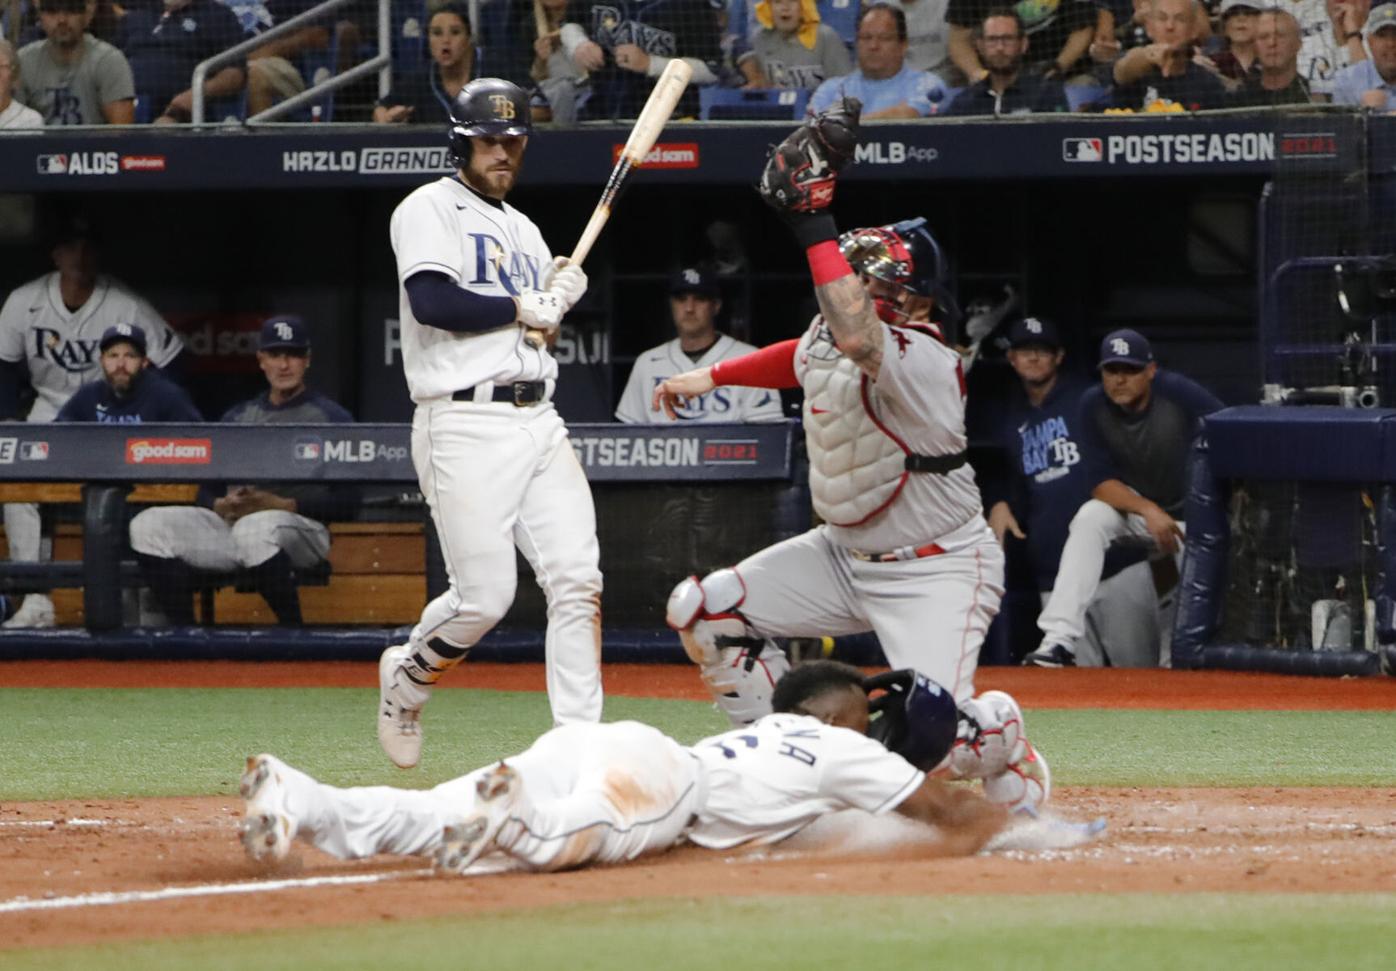 Tampa Bay Rays rally past Red Sox to equal baseball's best start in 139  years, Tampa Bay Rays